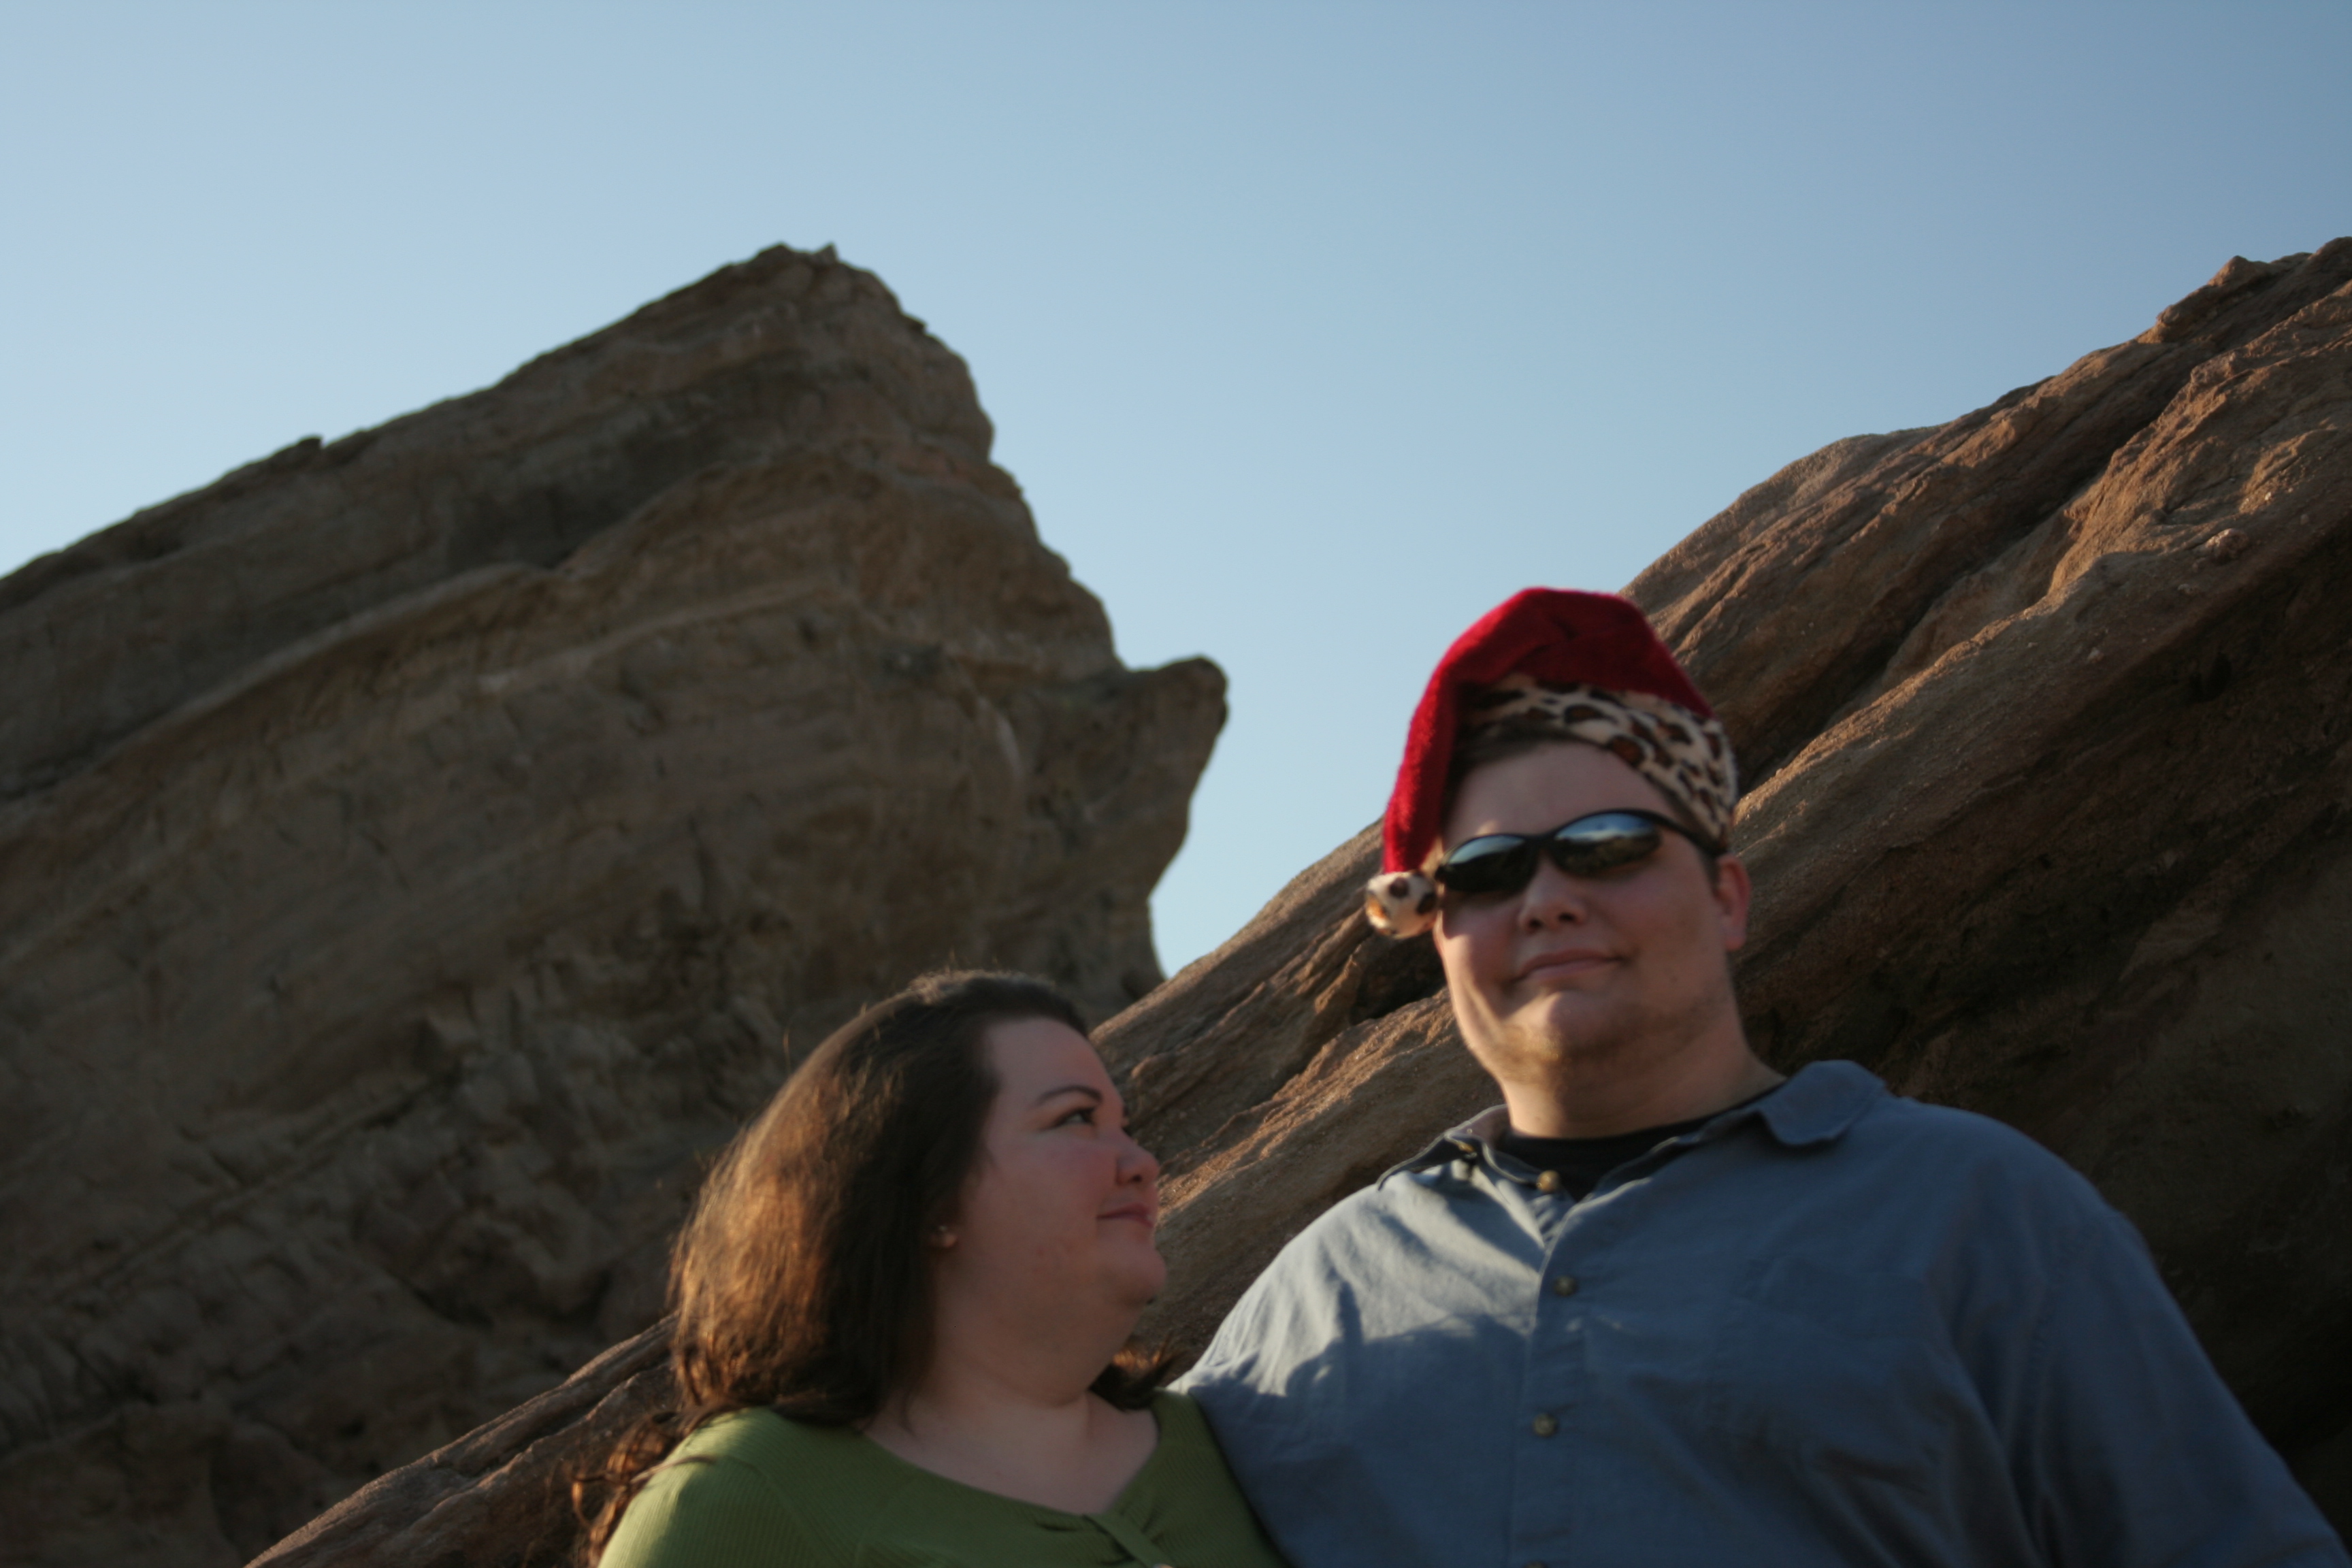 Bonnie and Daniel from 2009 at Vasquez Rocks. Bonnie is looking intently at Daniel, and Daniel is wearing a leopard print fuzzy Santa cap and sunglasses.